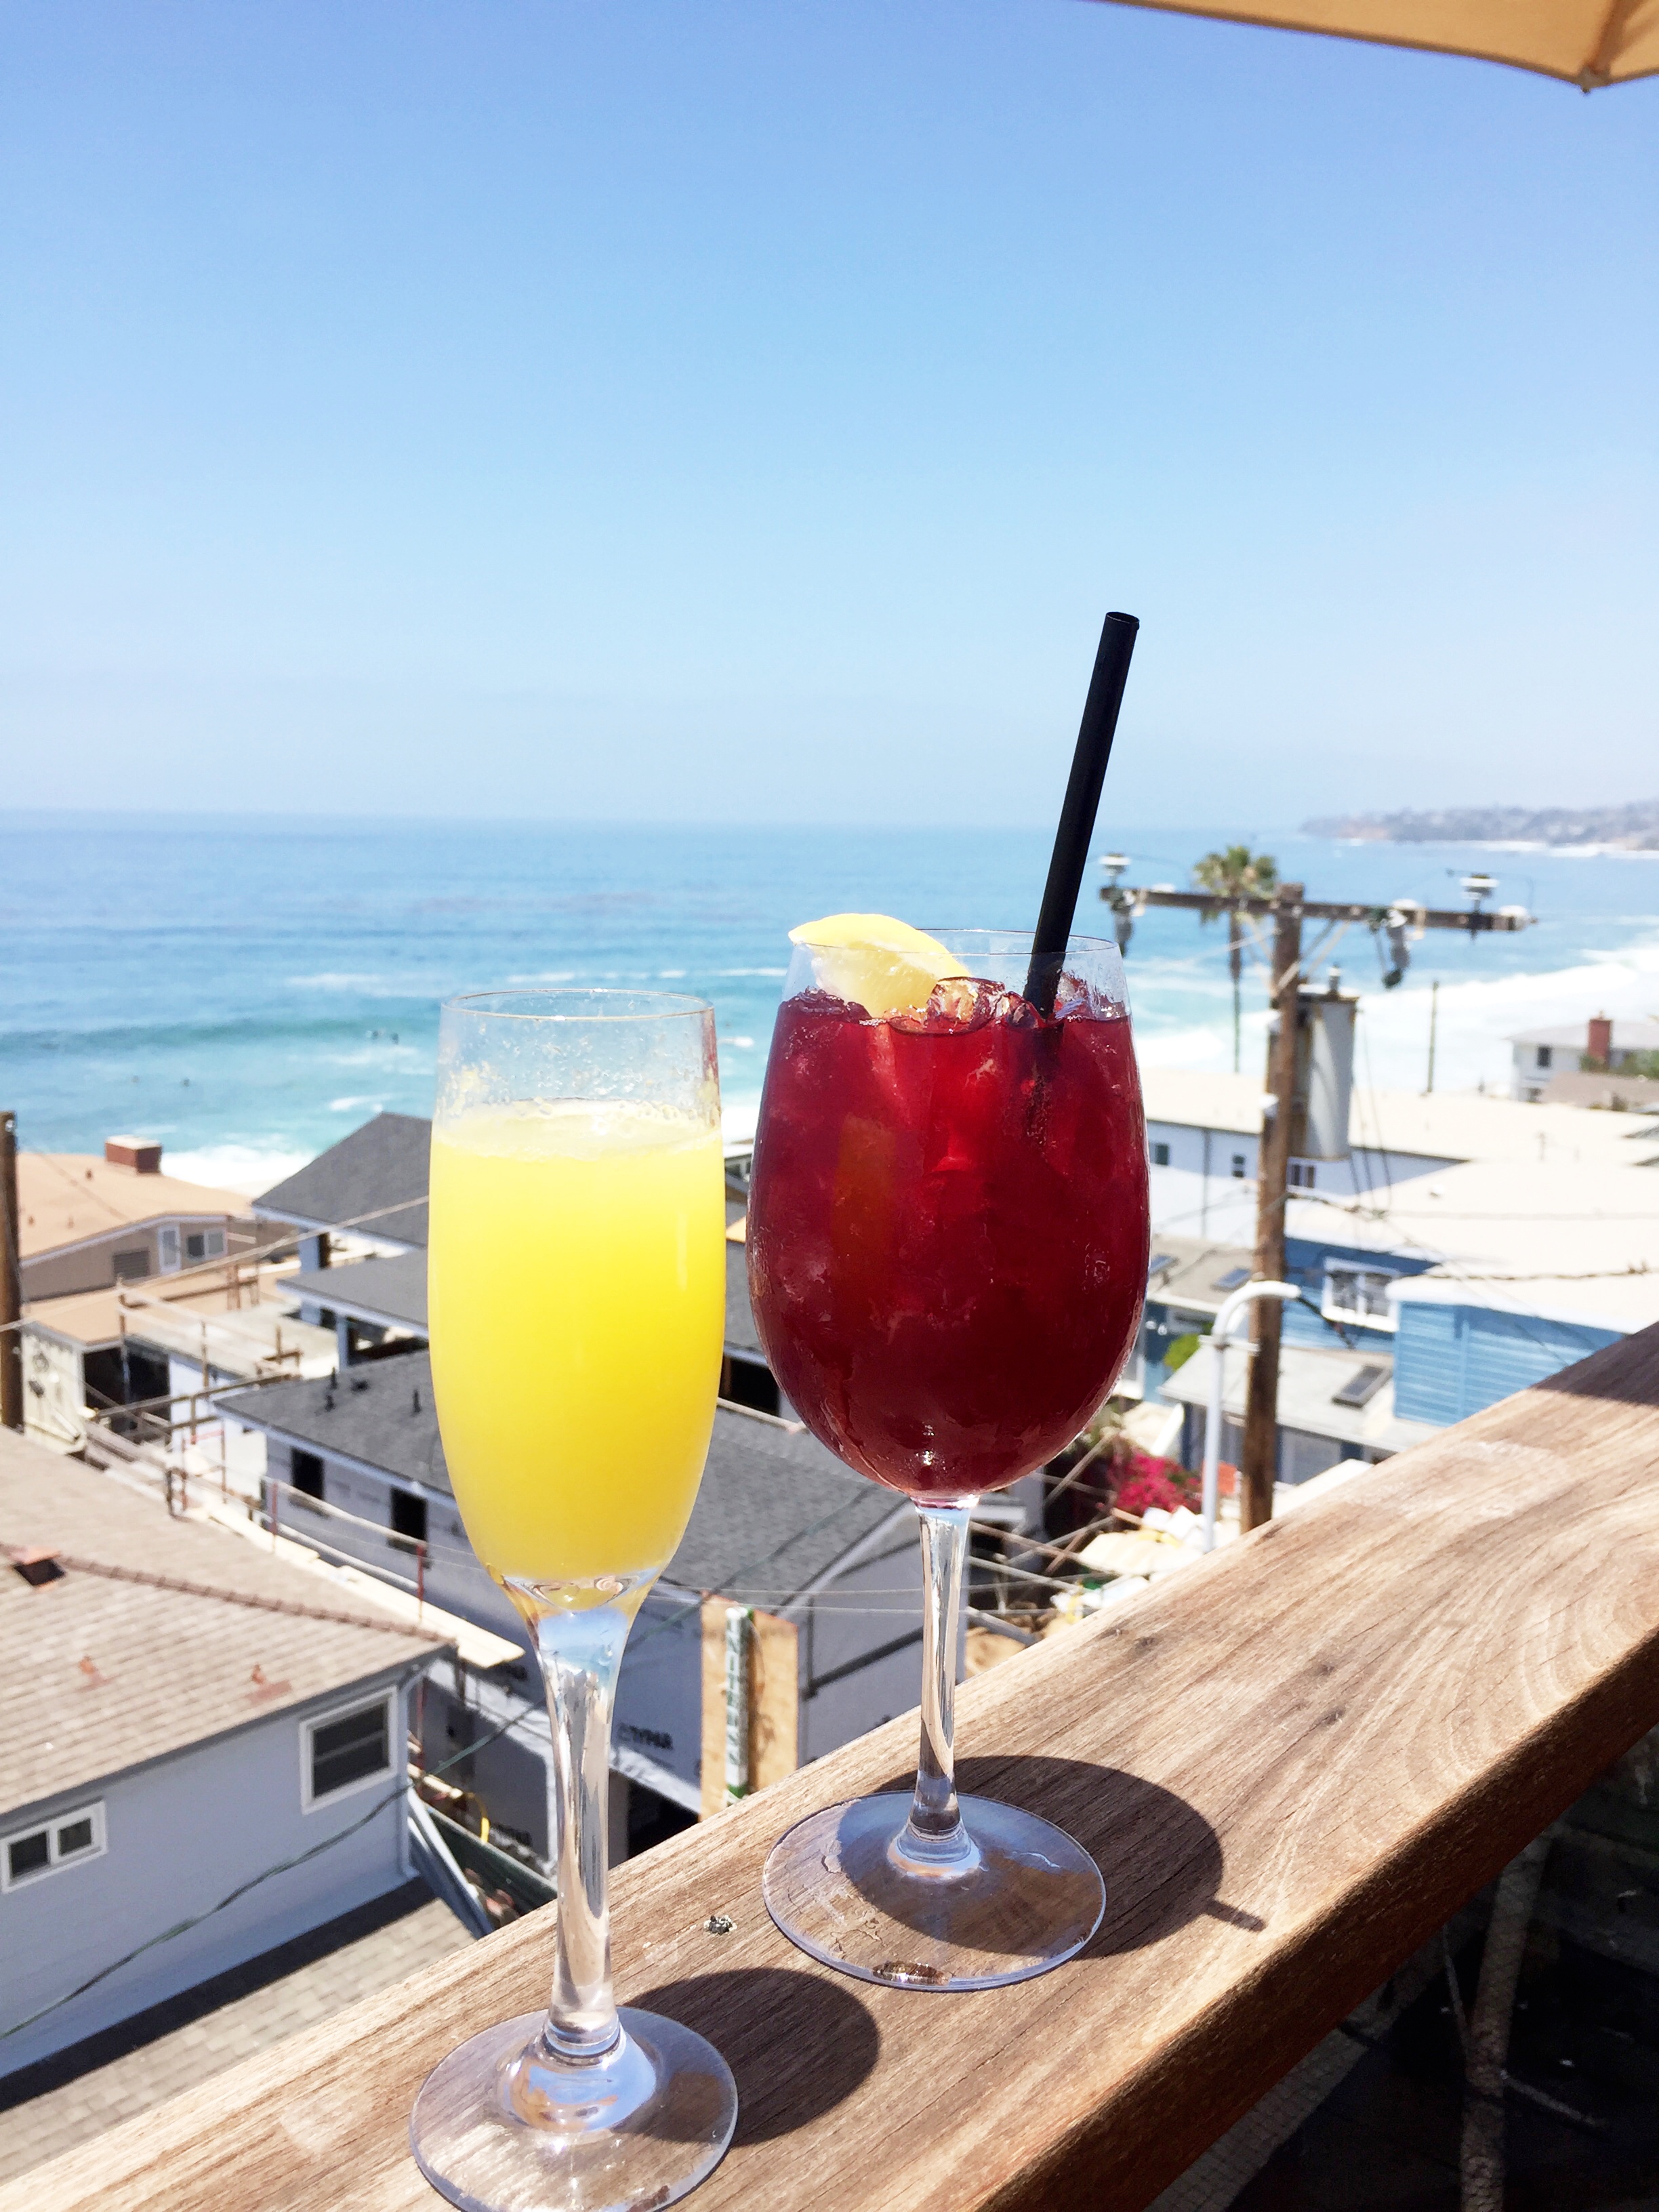 The Rooftop Lounge Laguna Beach review